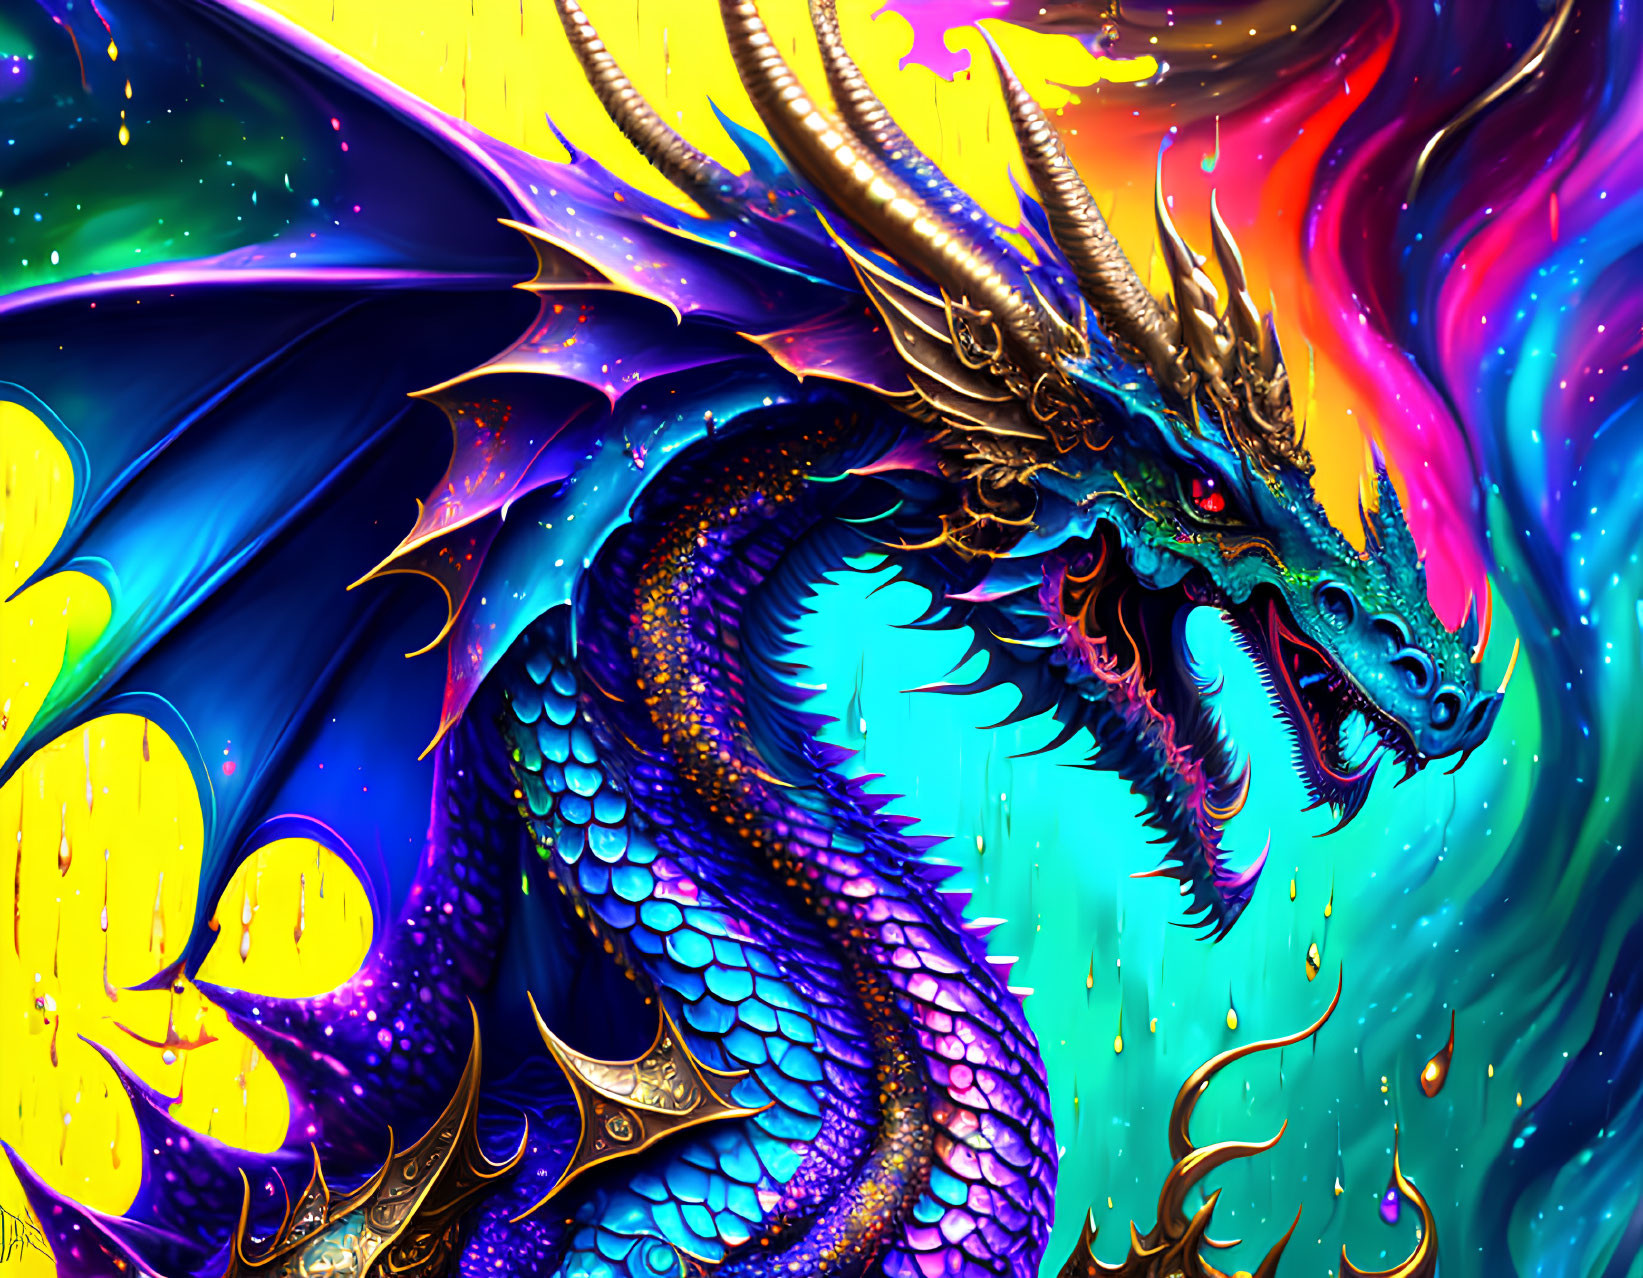 Colorful Dragon Illustration with Blue Scales and Gold Accents on Cosmic Background